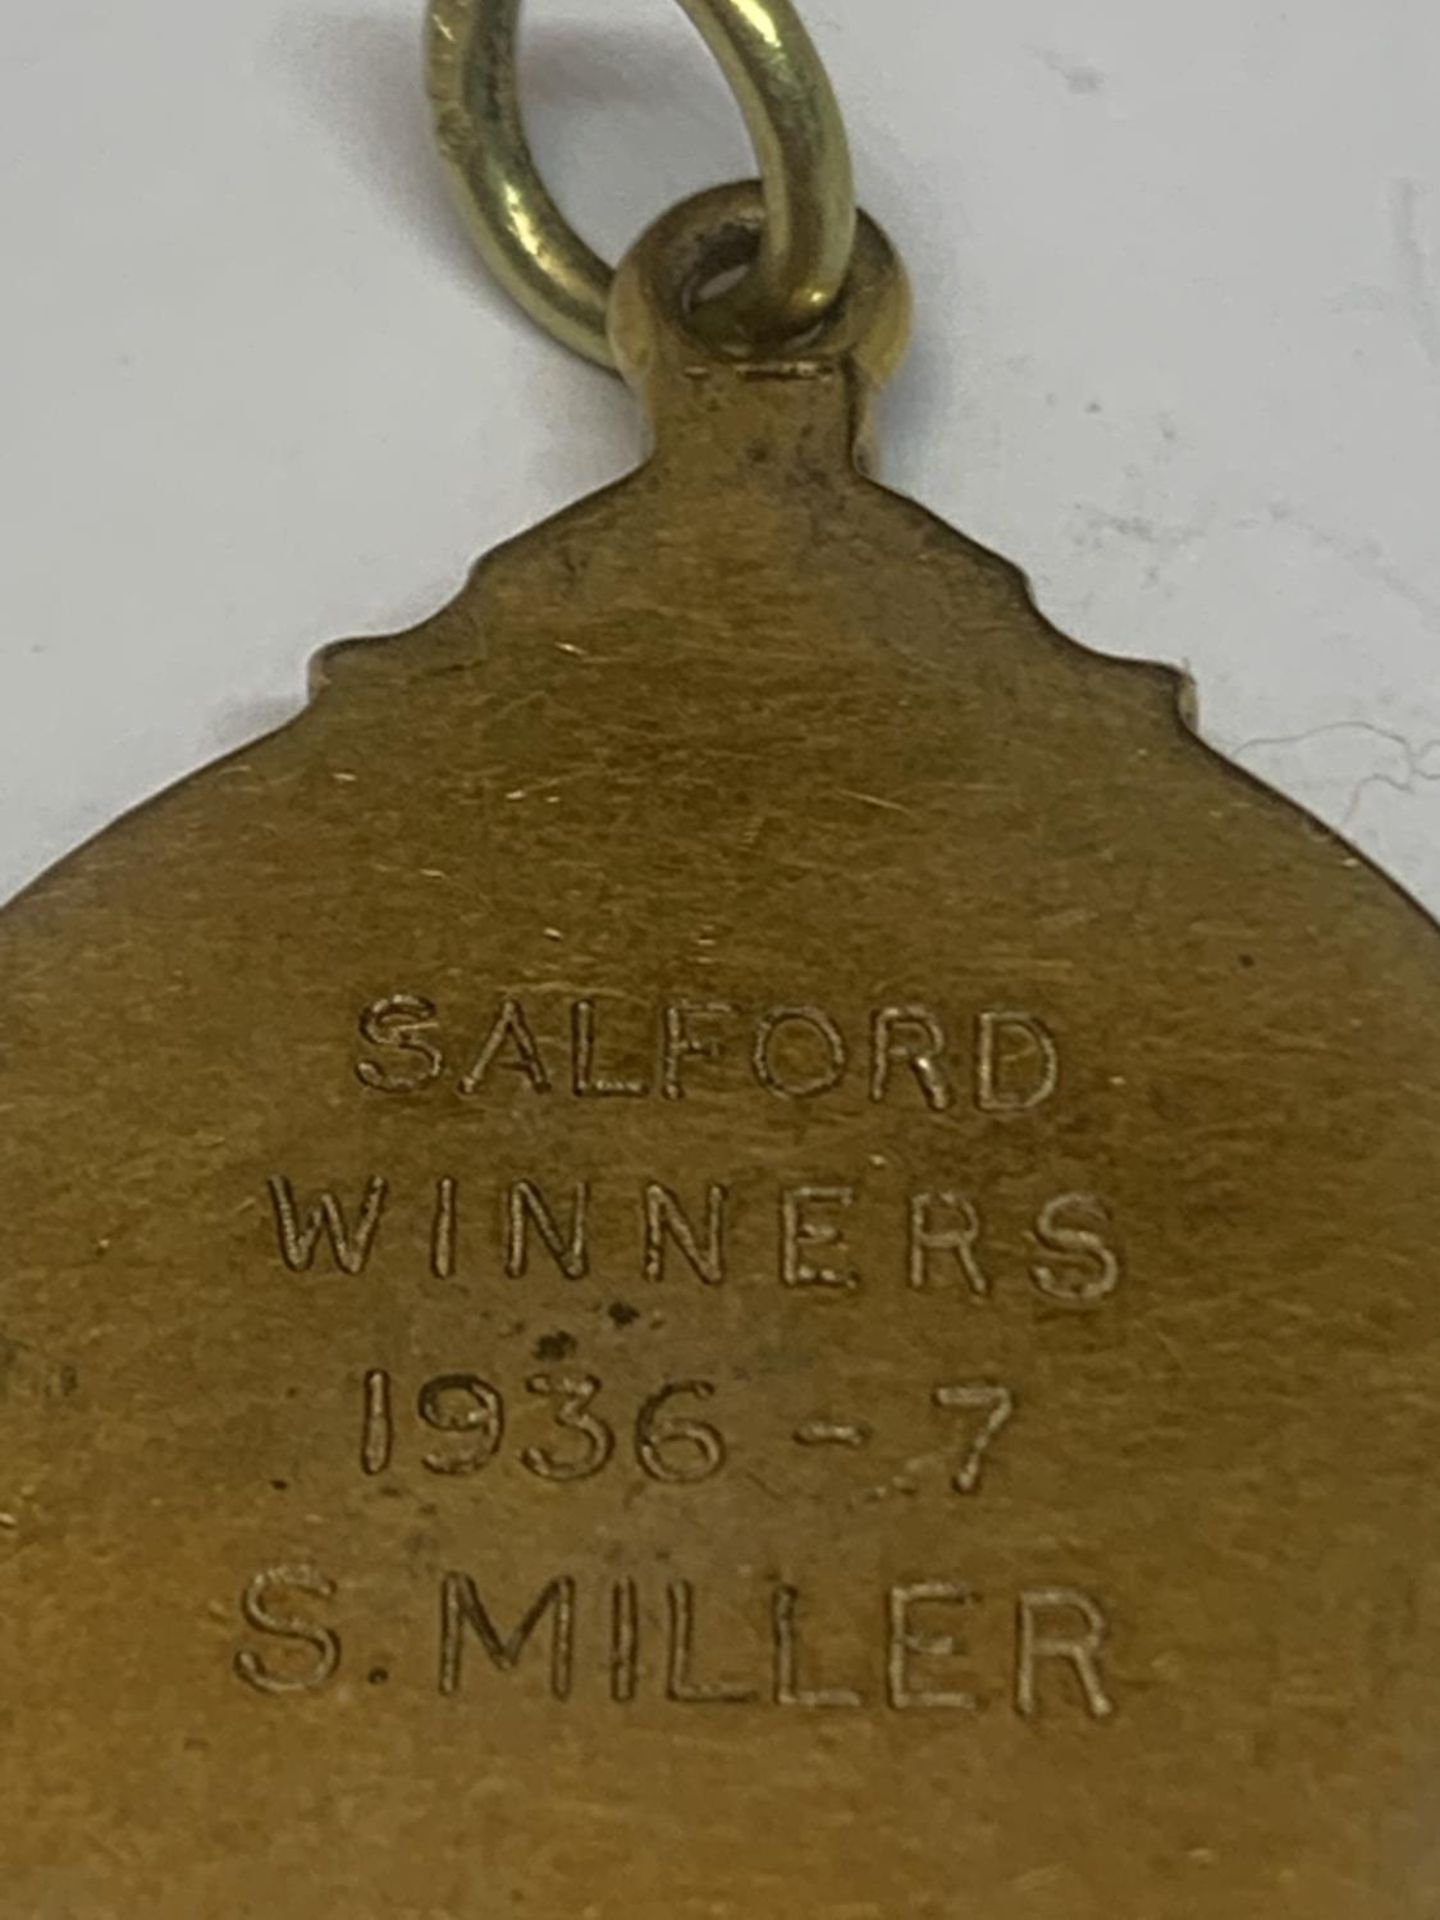 A HALLMARKED 9 CARAT GOLD NORTHERN RUGBY LEAGUE FOOTBALL MEDAL ENGRAVED SALFORD WINNERS 1936 -7 S. - Image 3 of 5